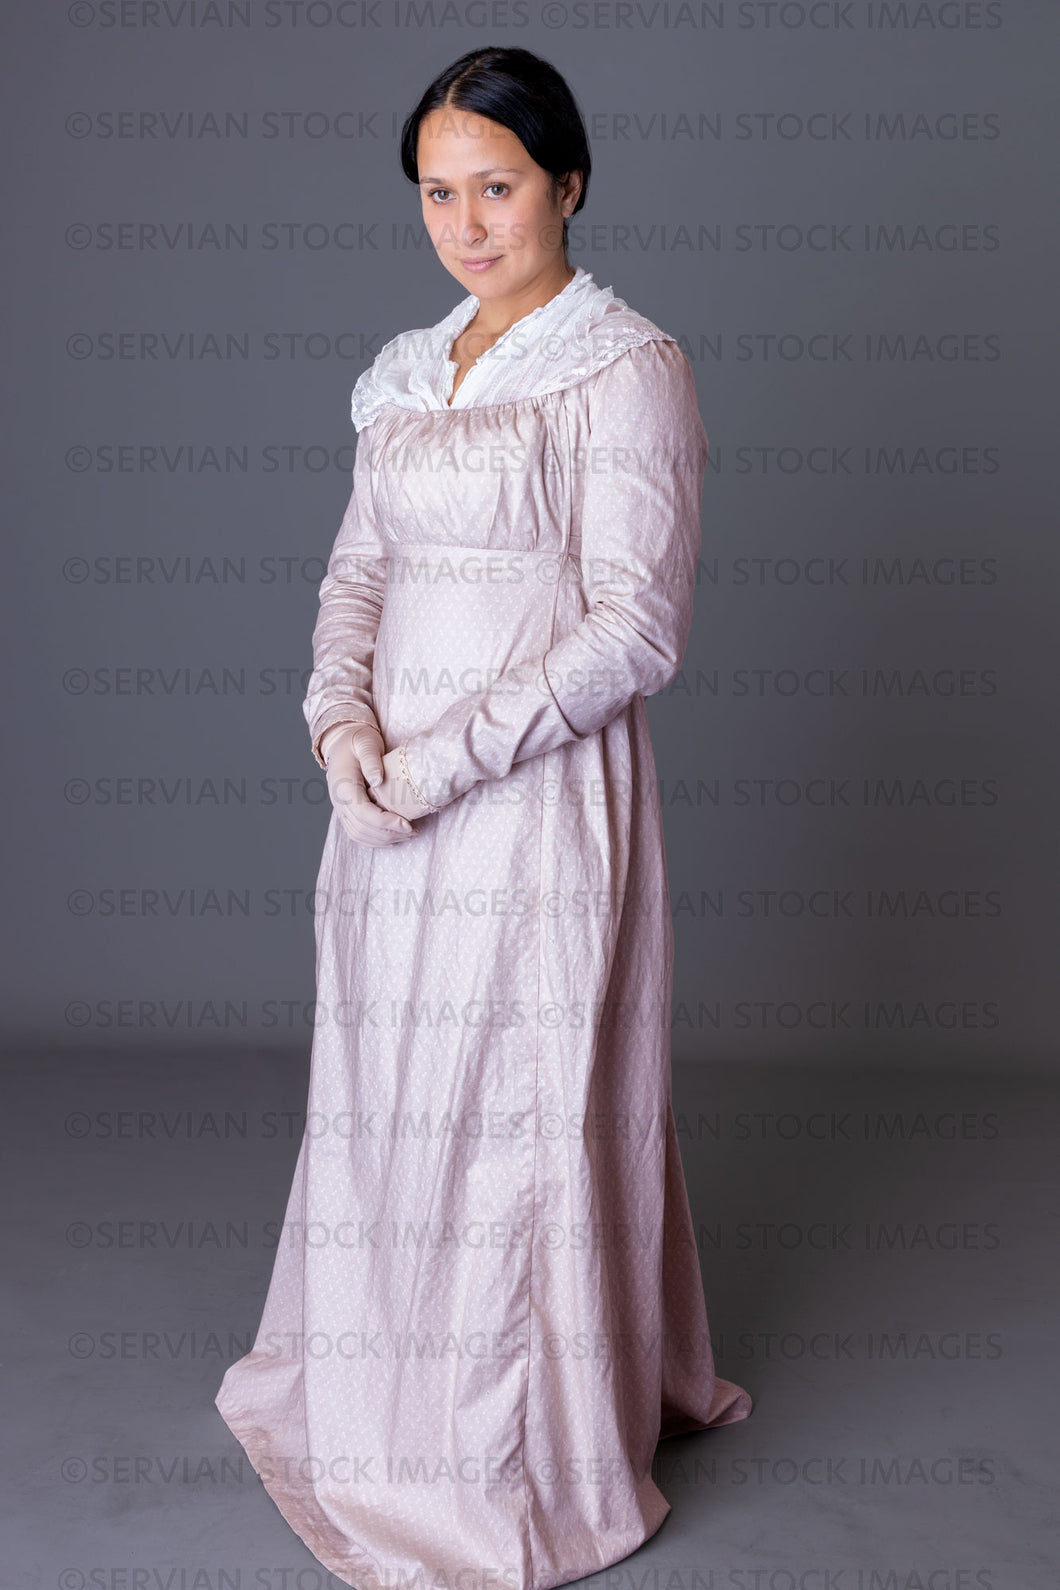 Regency woman wearing a cotton dress with a lace modesty shawl (Sylvia 5934)